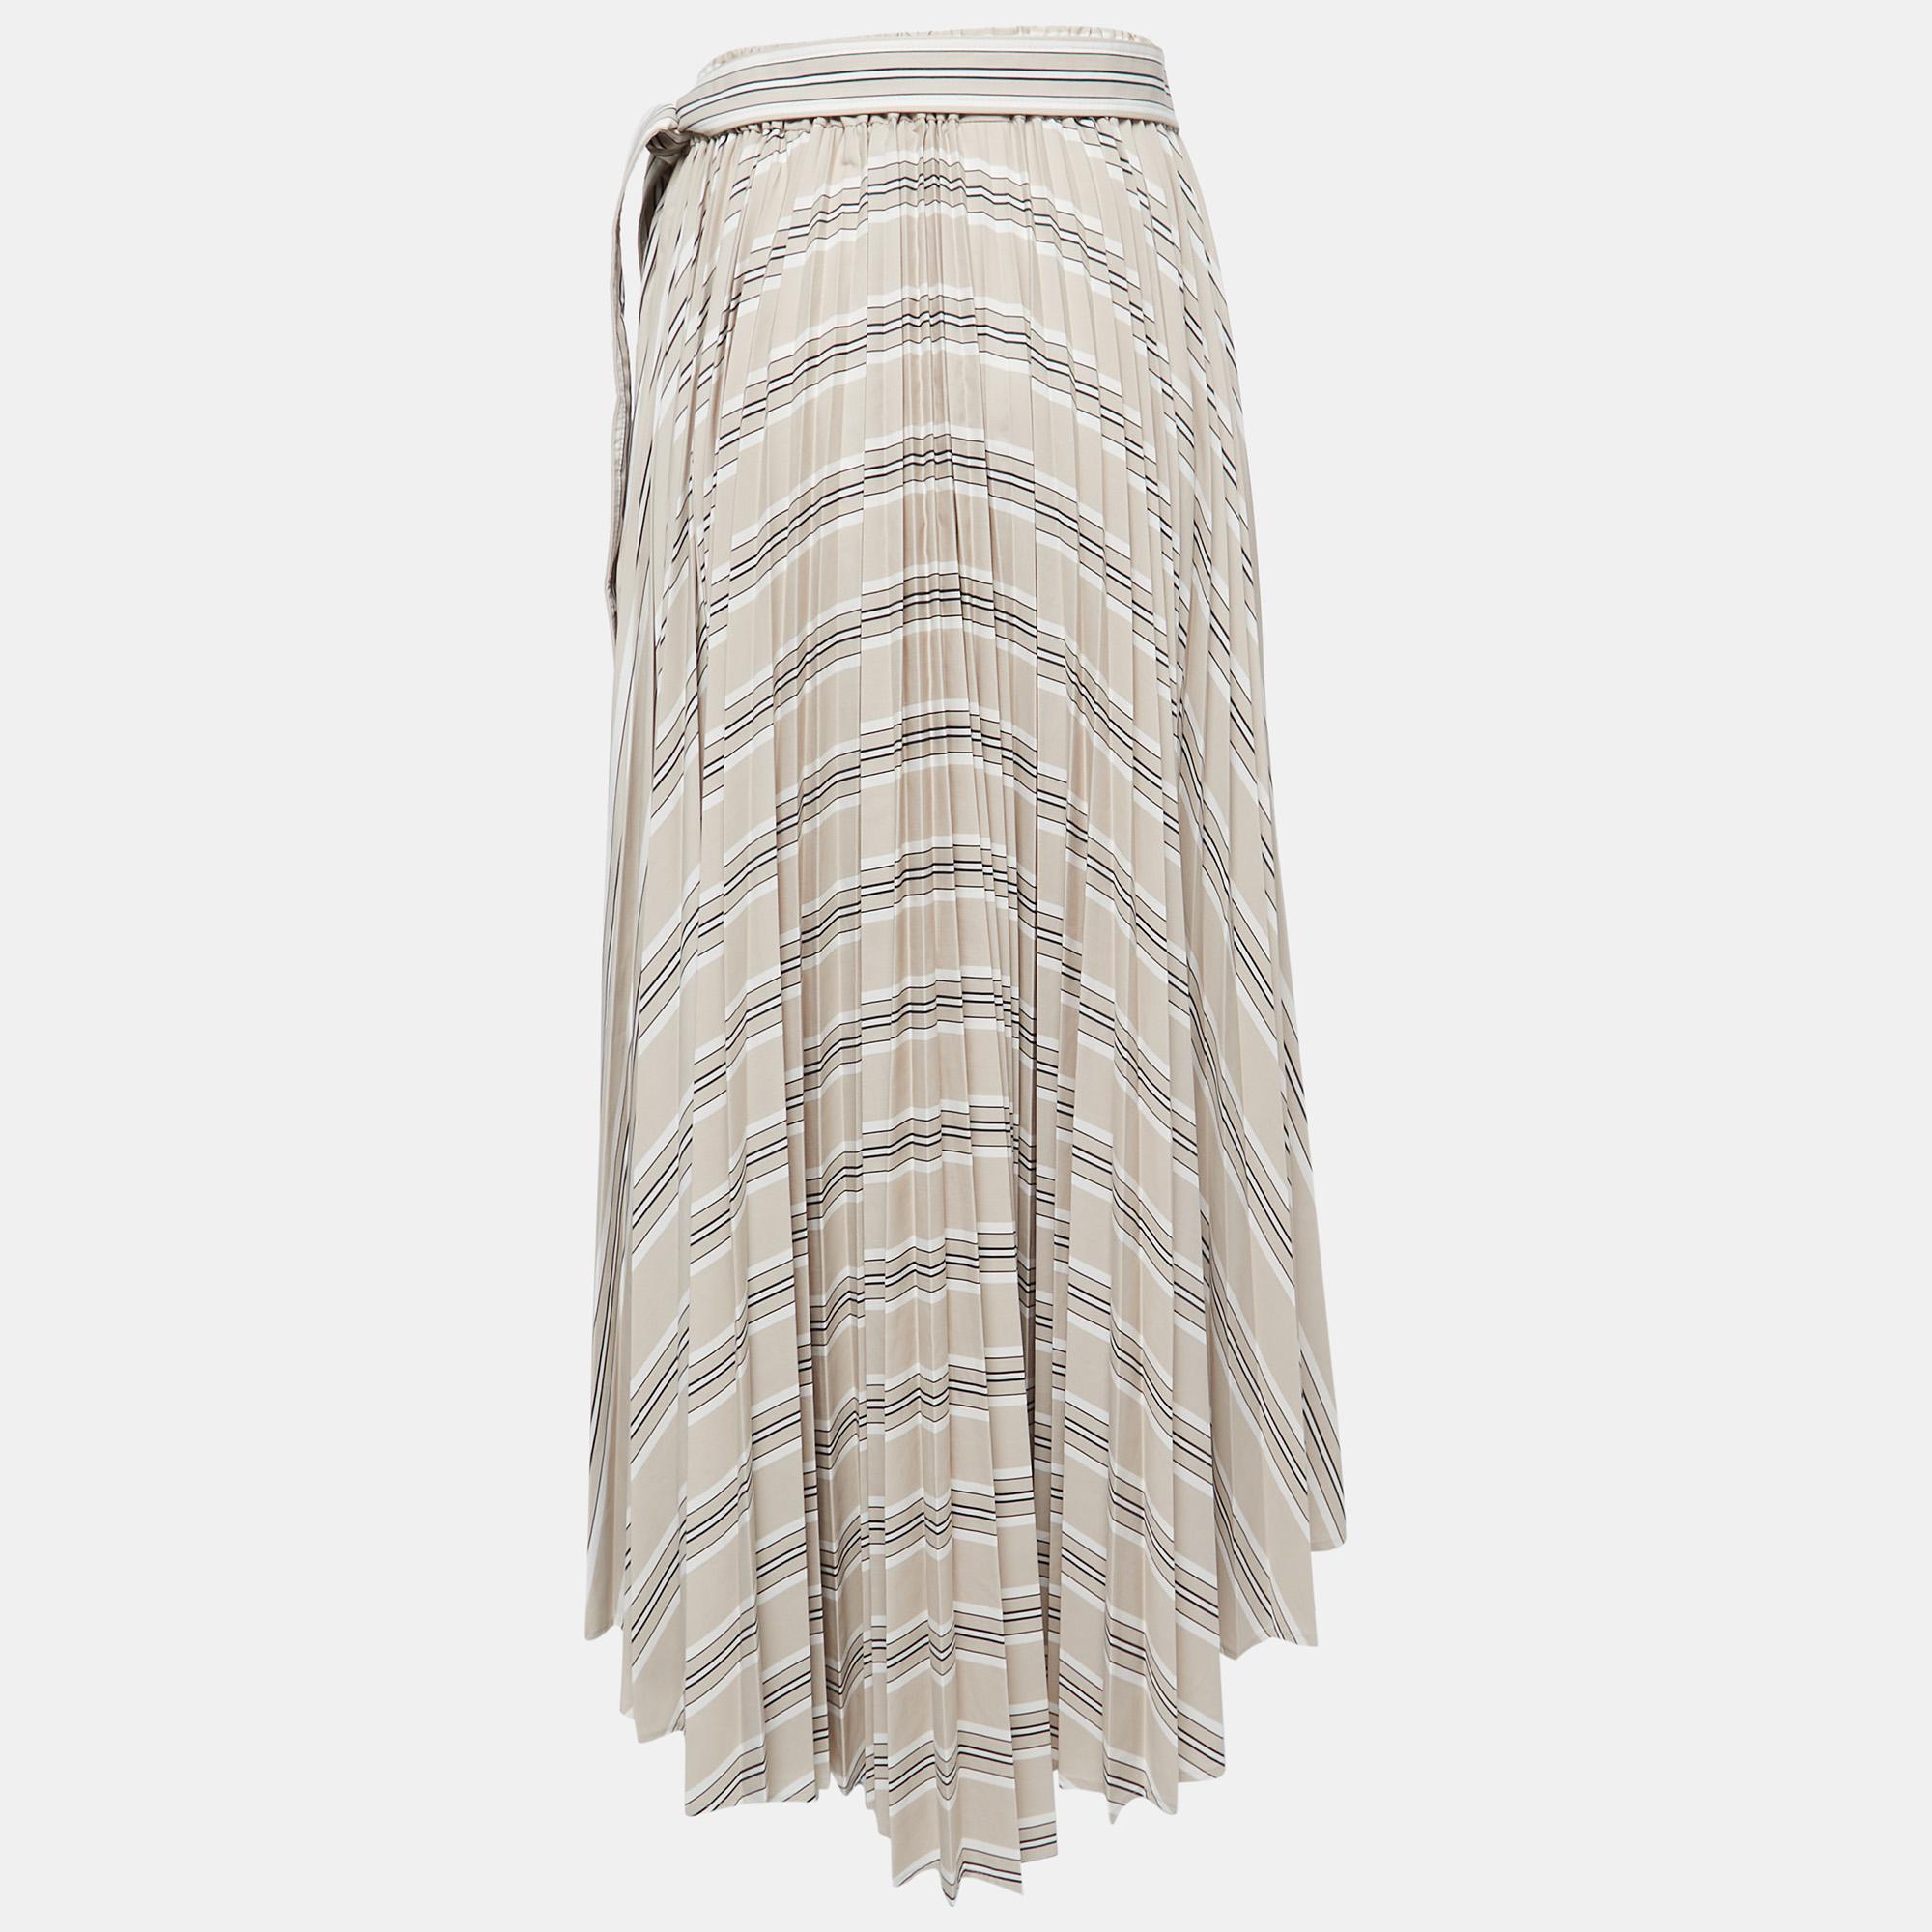 Experience the charm of designer clothing with this gorgeous Brunello Cucinelli skirt. Made from quality fabrics, the skirt has a simple allure and a great fit. Pair it up with a tailored blouse or a simple top and high heels.

Includes: Price Tag